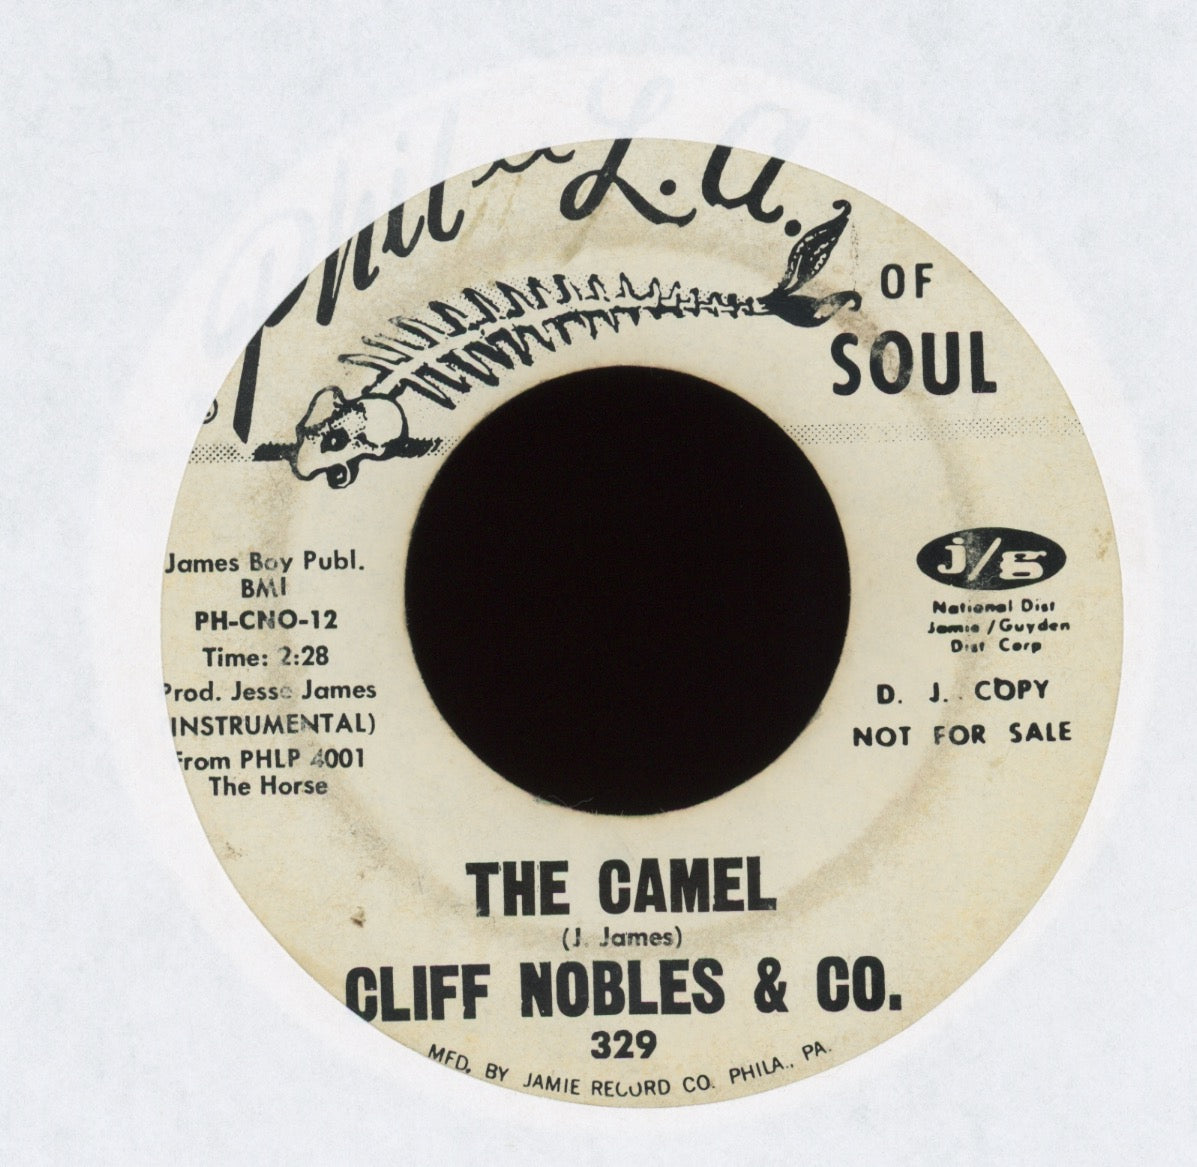 Cliff Nobles & Co - Gettin' Away on Phil L.A. of Soul Promo Funk Soul 45